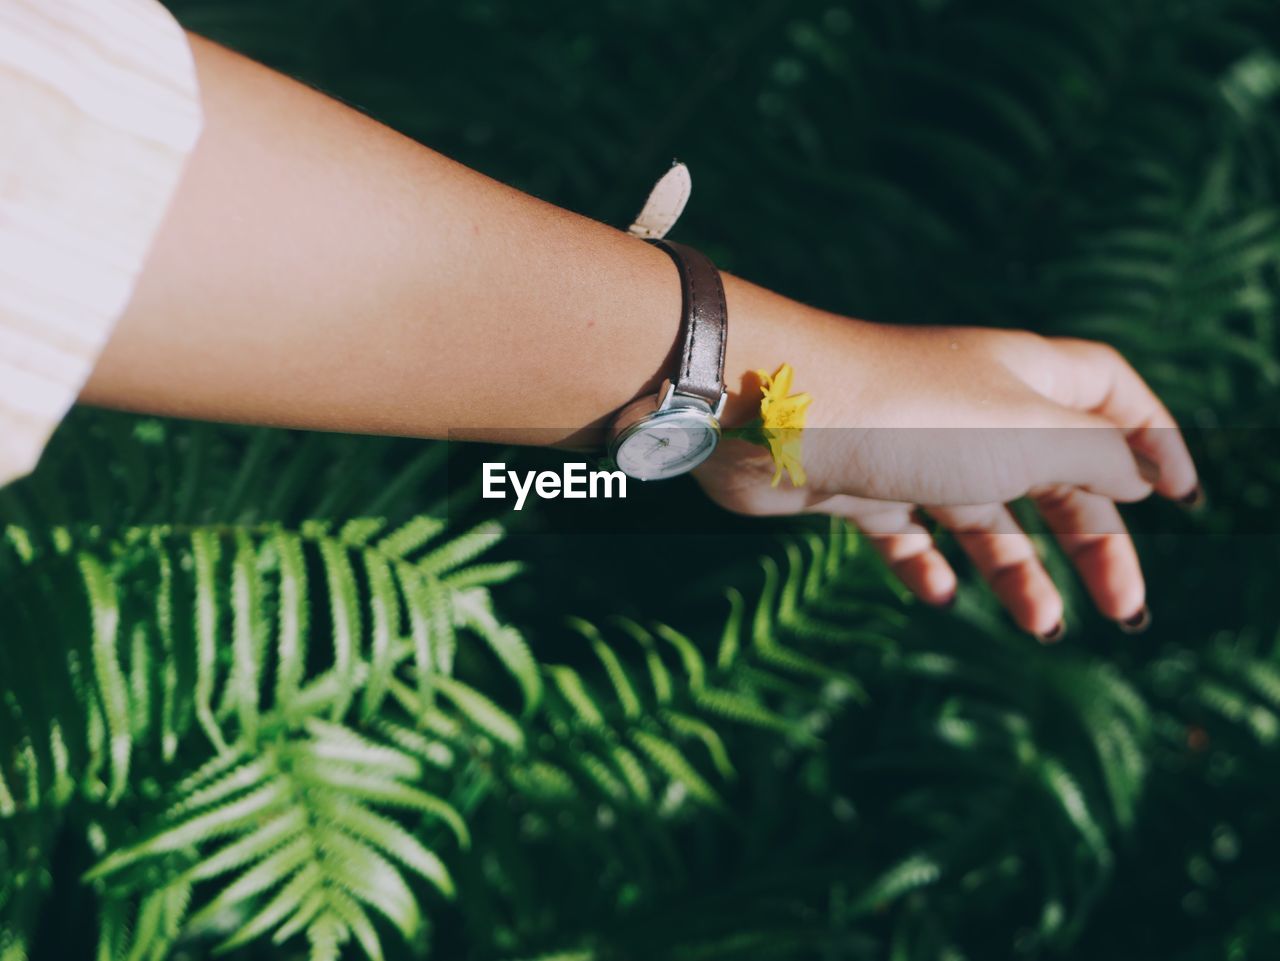 Cropped image of woman hand with yellow flower against plant